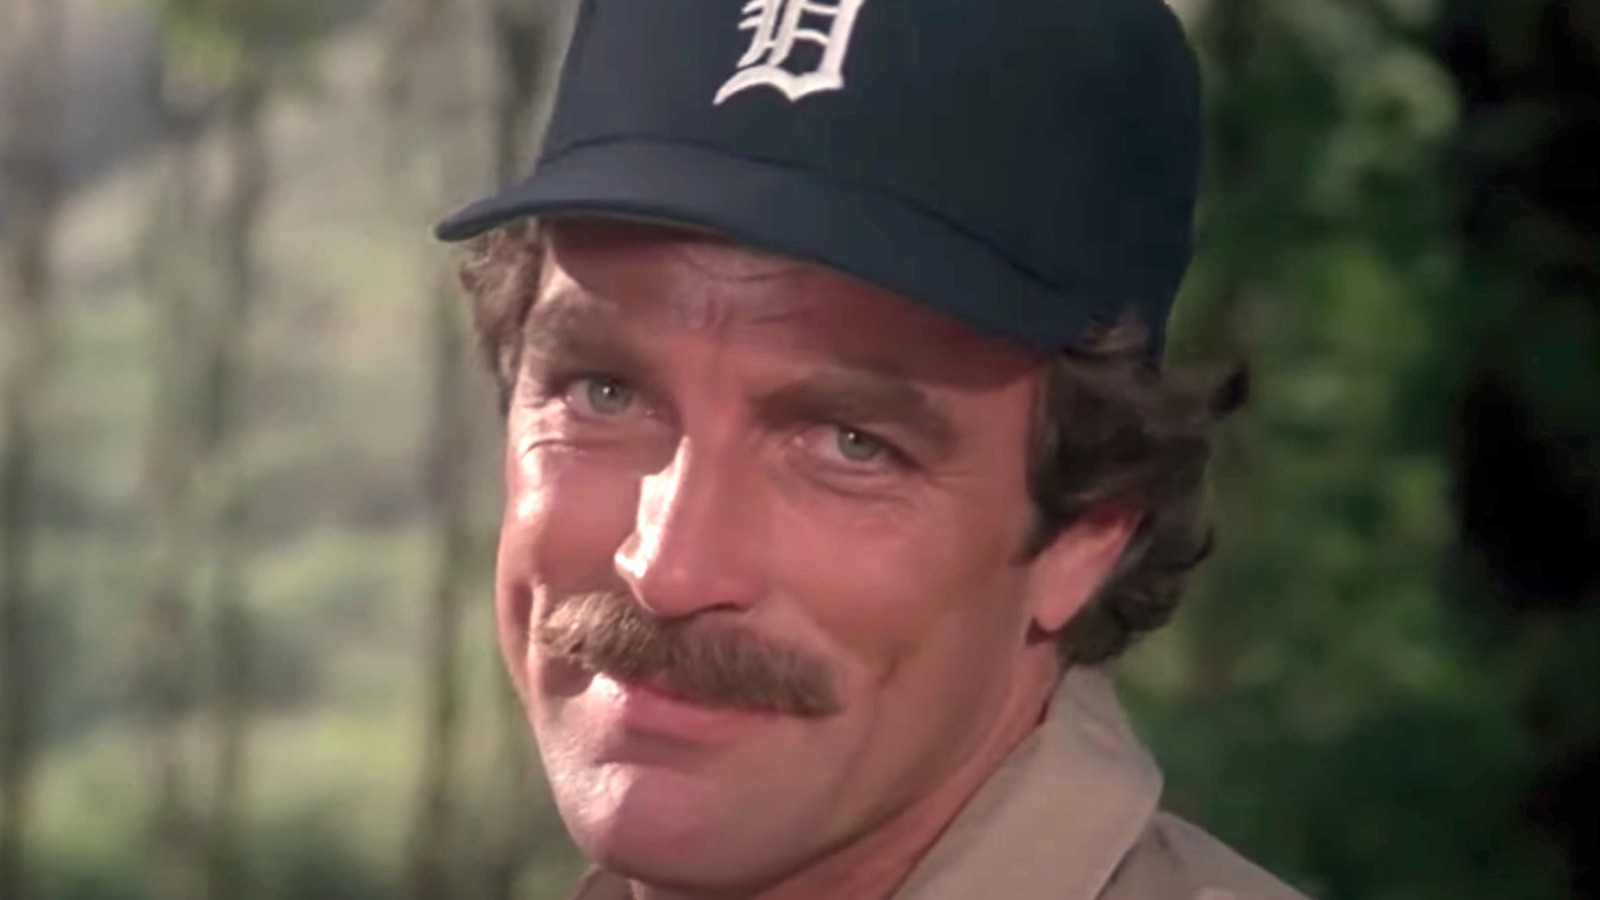 Magnum P.I.' will continue love affair with Detroit Tigers hat